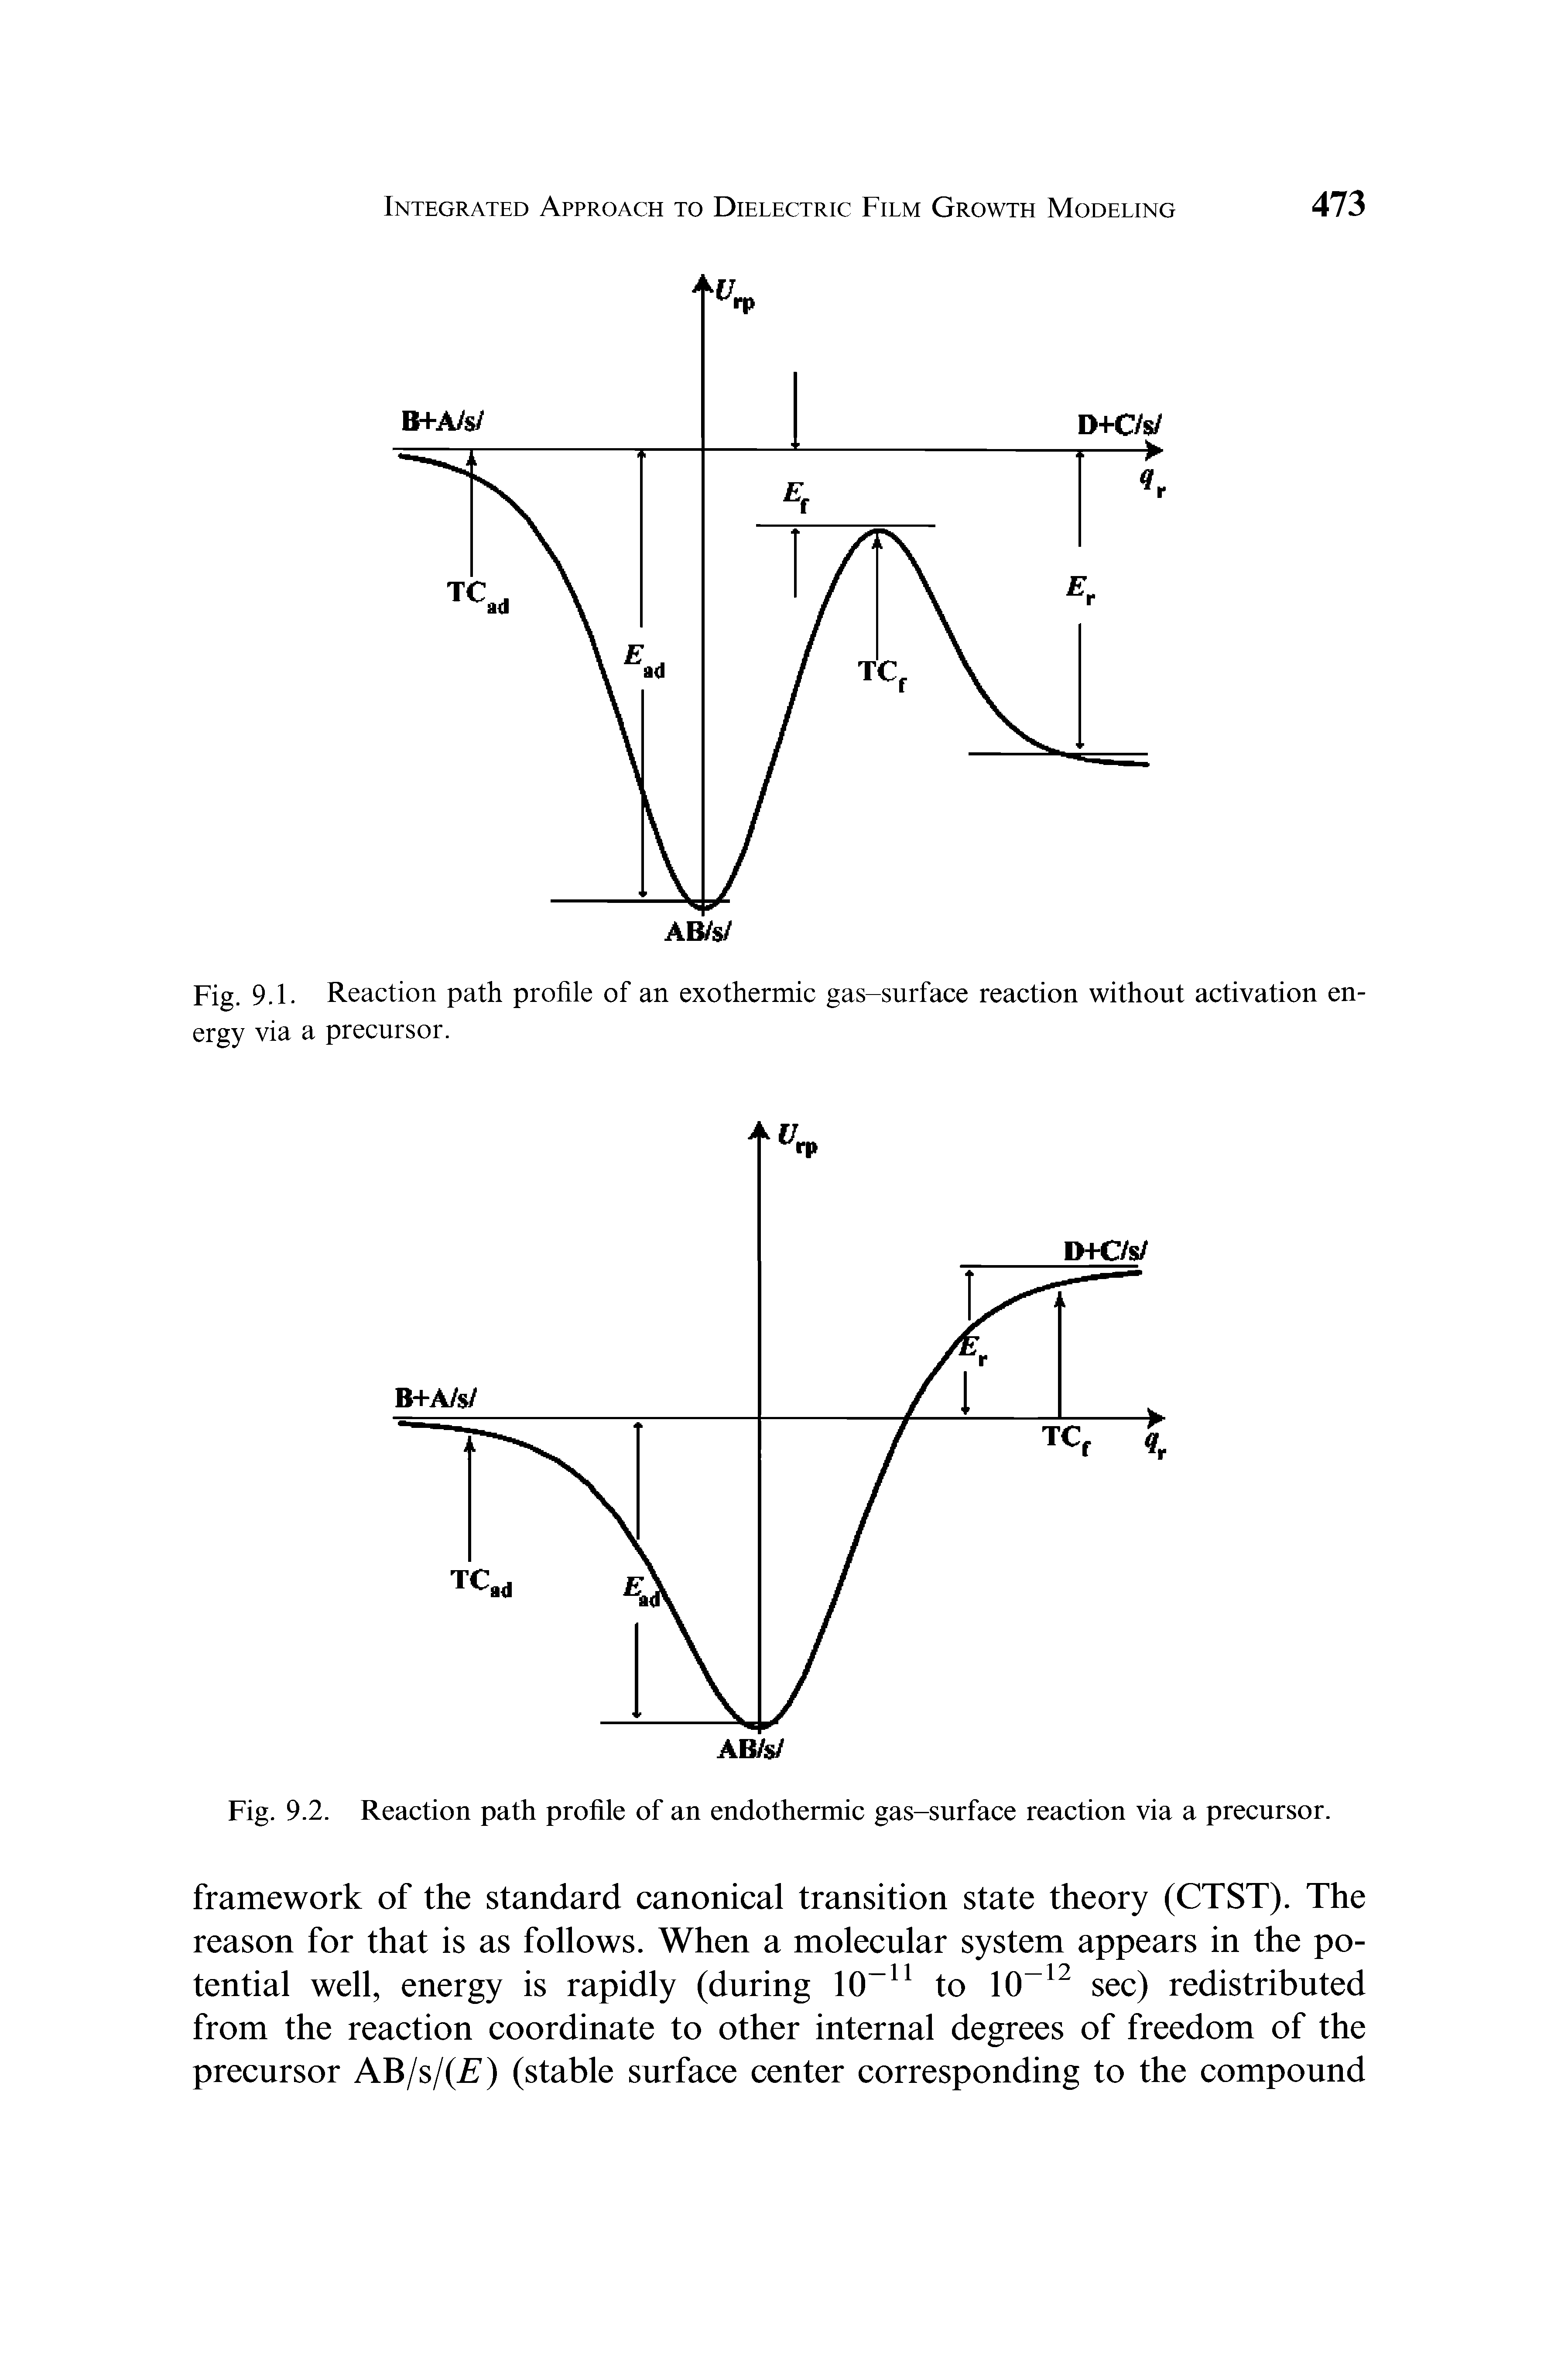 Fig. 9.1. Reaction path profile of an exothermic gas-surface reaction without activation energy via a precursor.